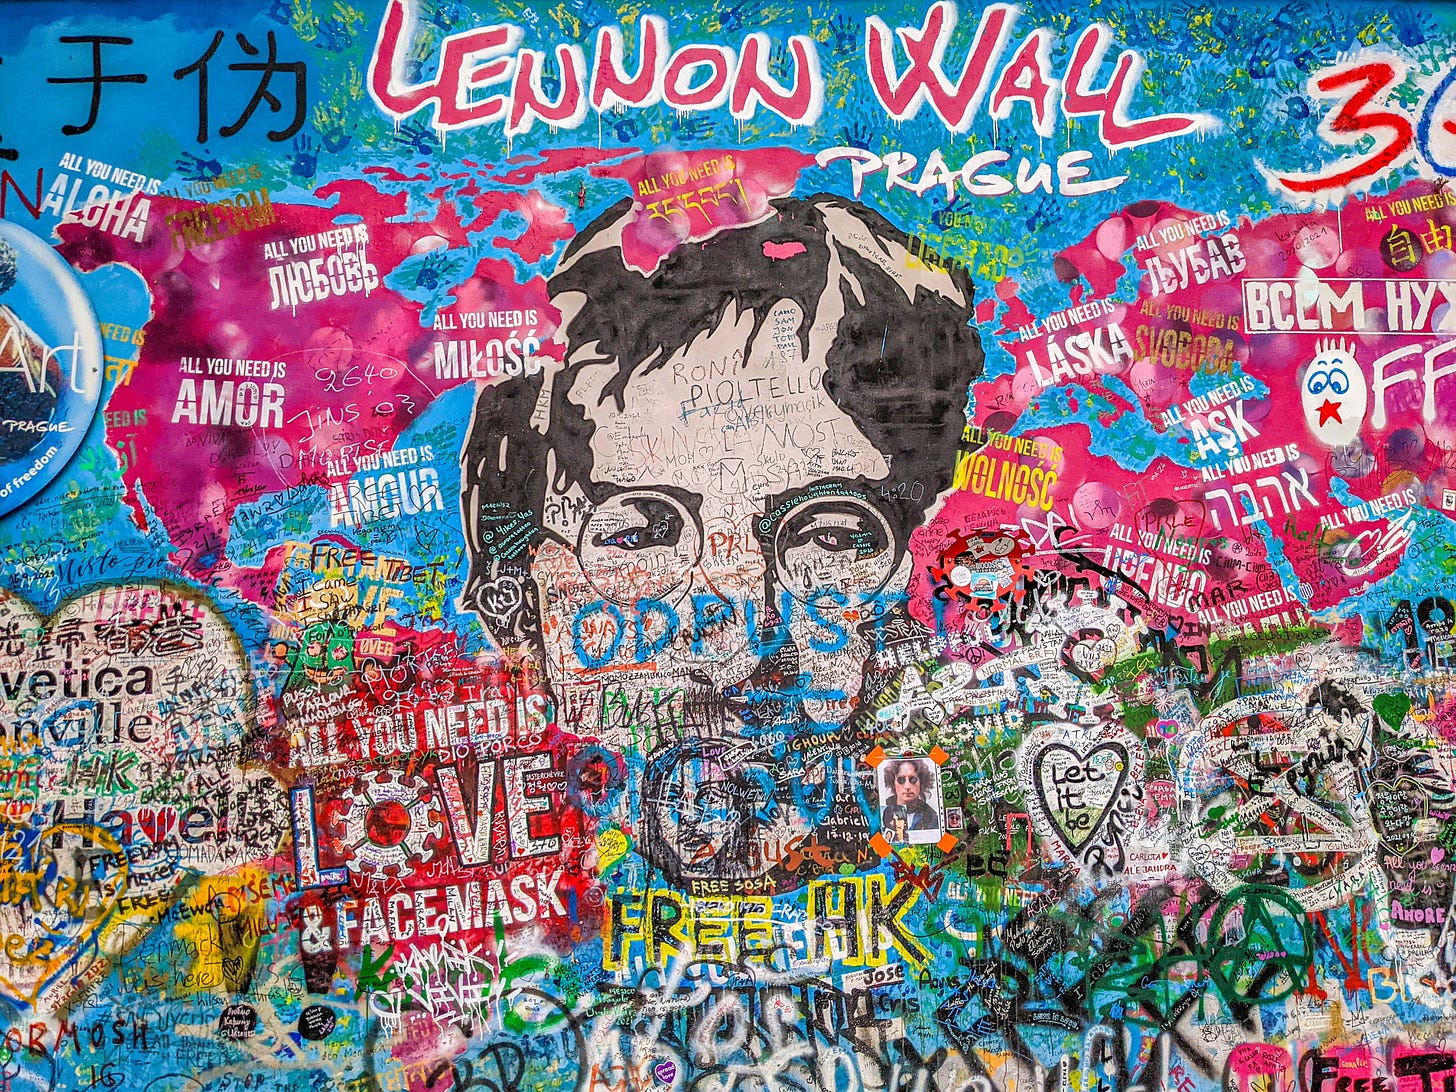 The Lennon Wall is a famous mural space in Lesser Town filled with all kinds of colorful art.